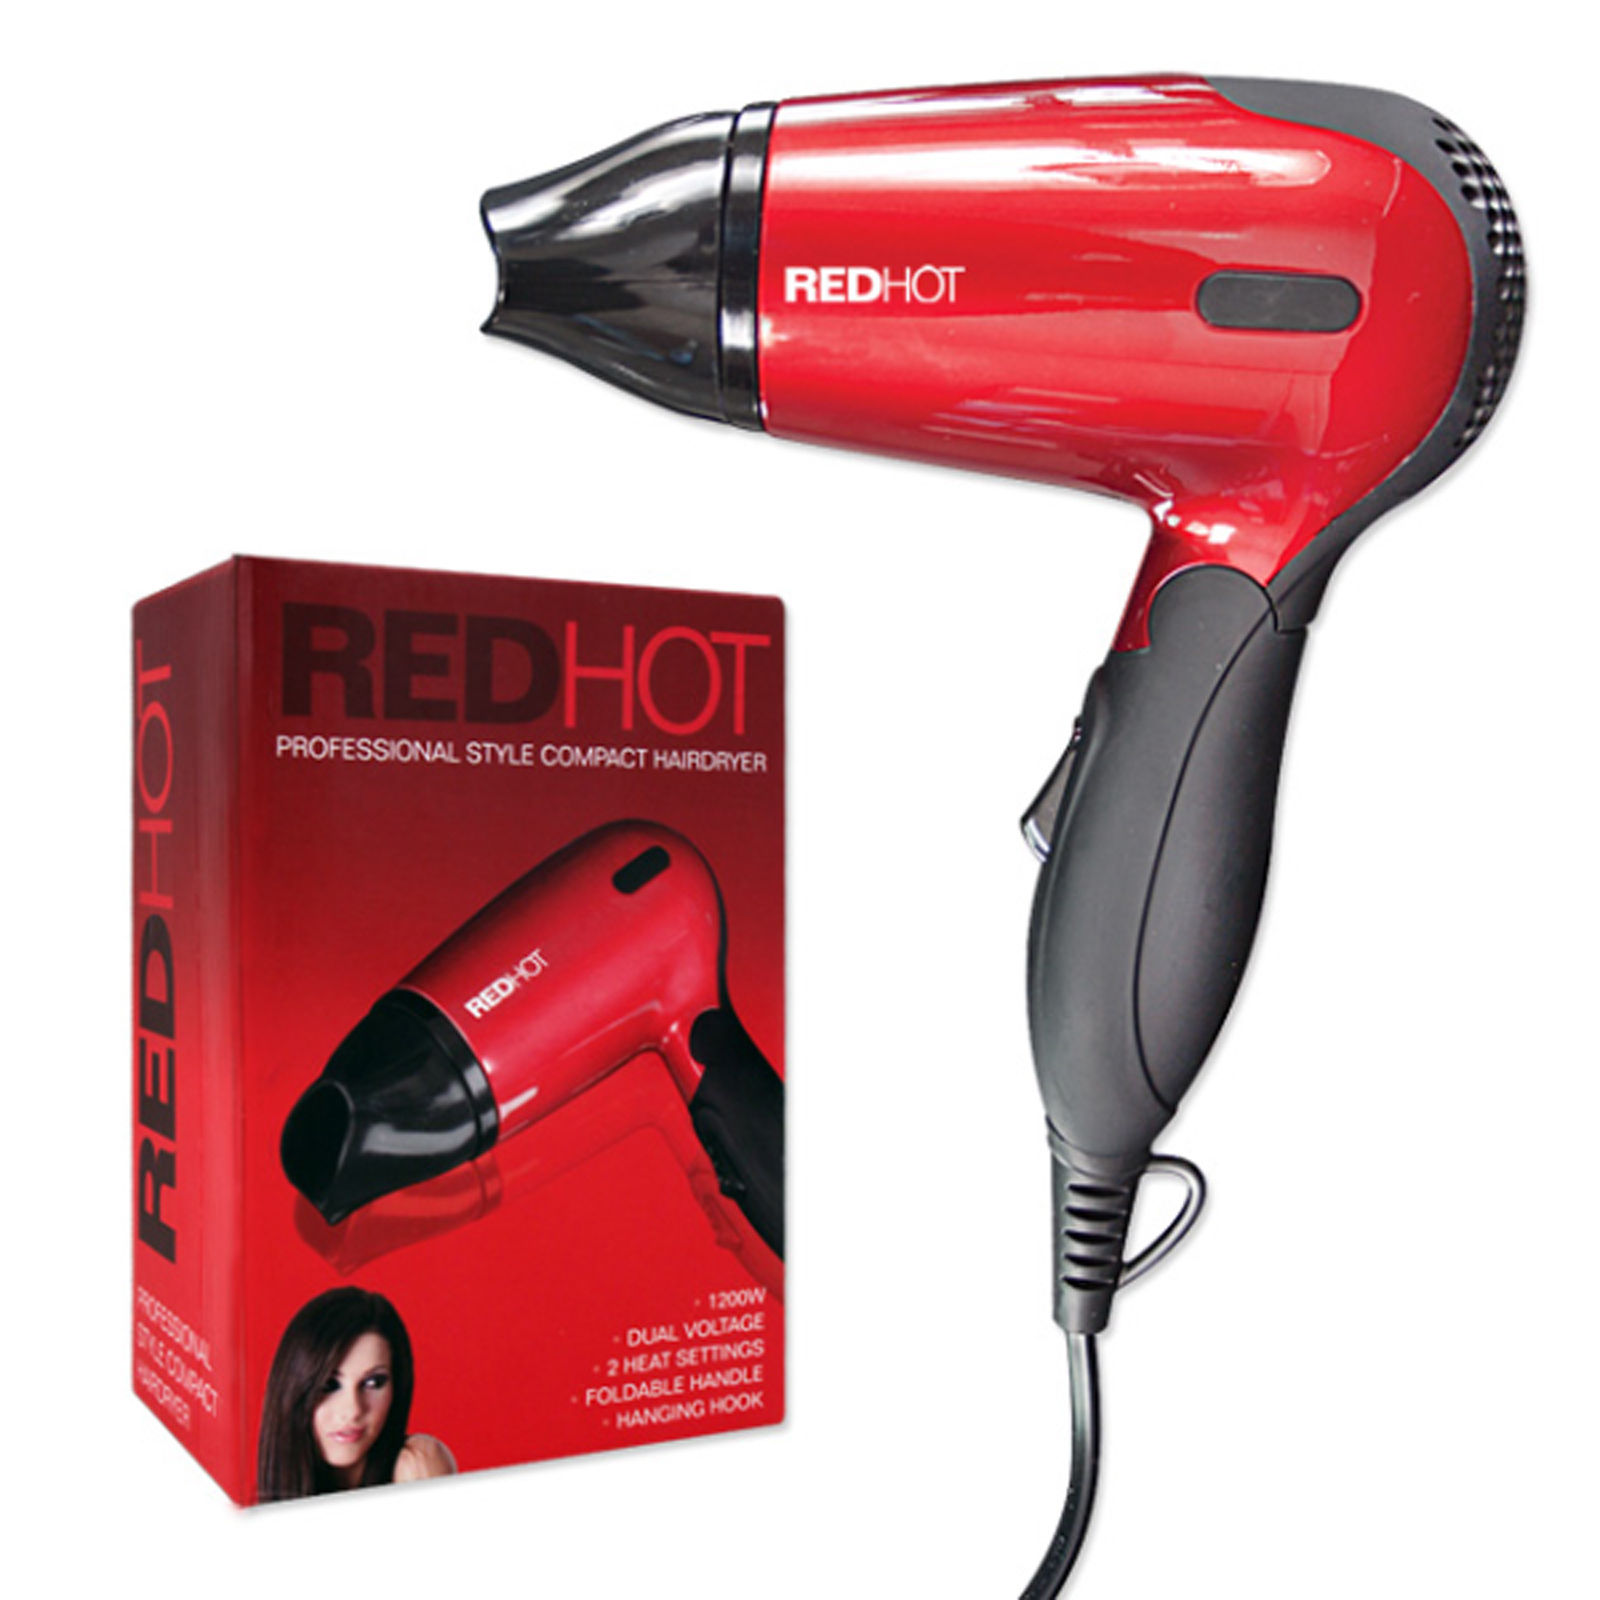 Red hot hair dryer